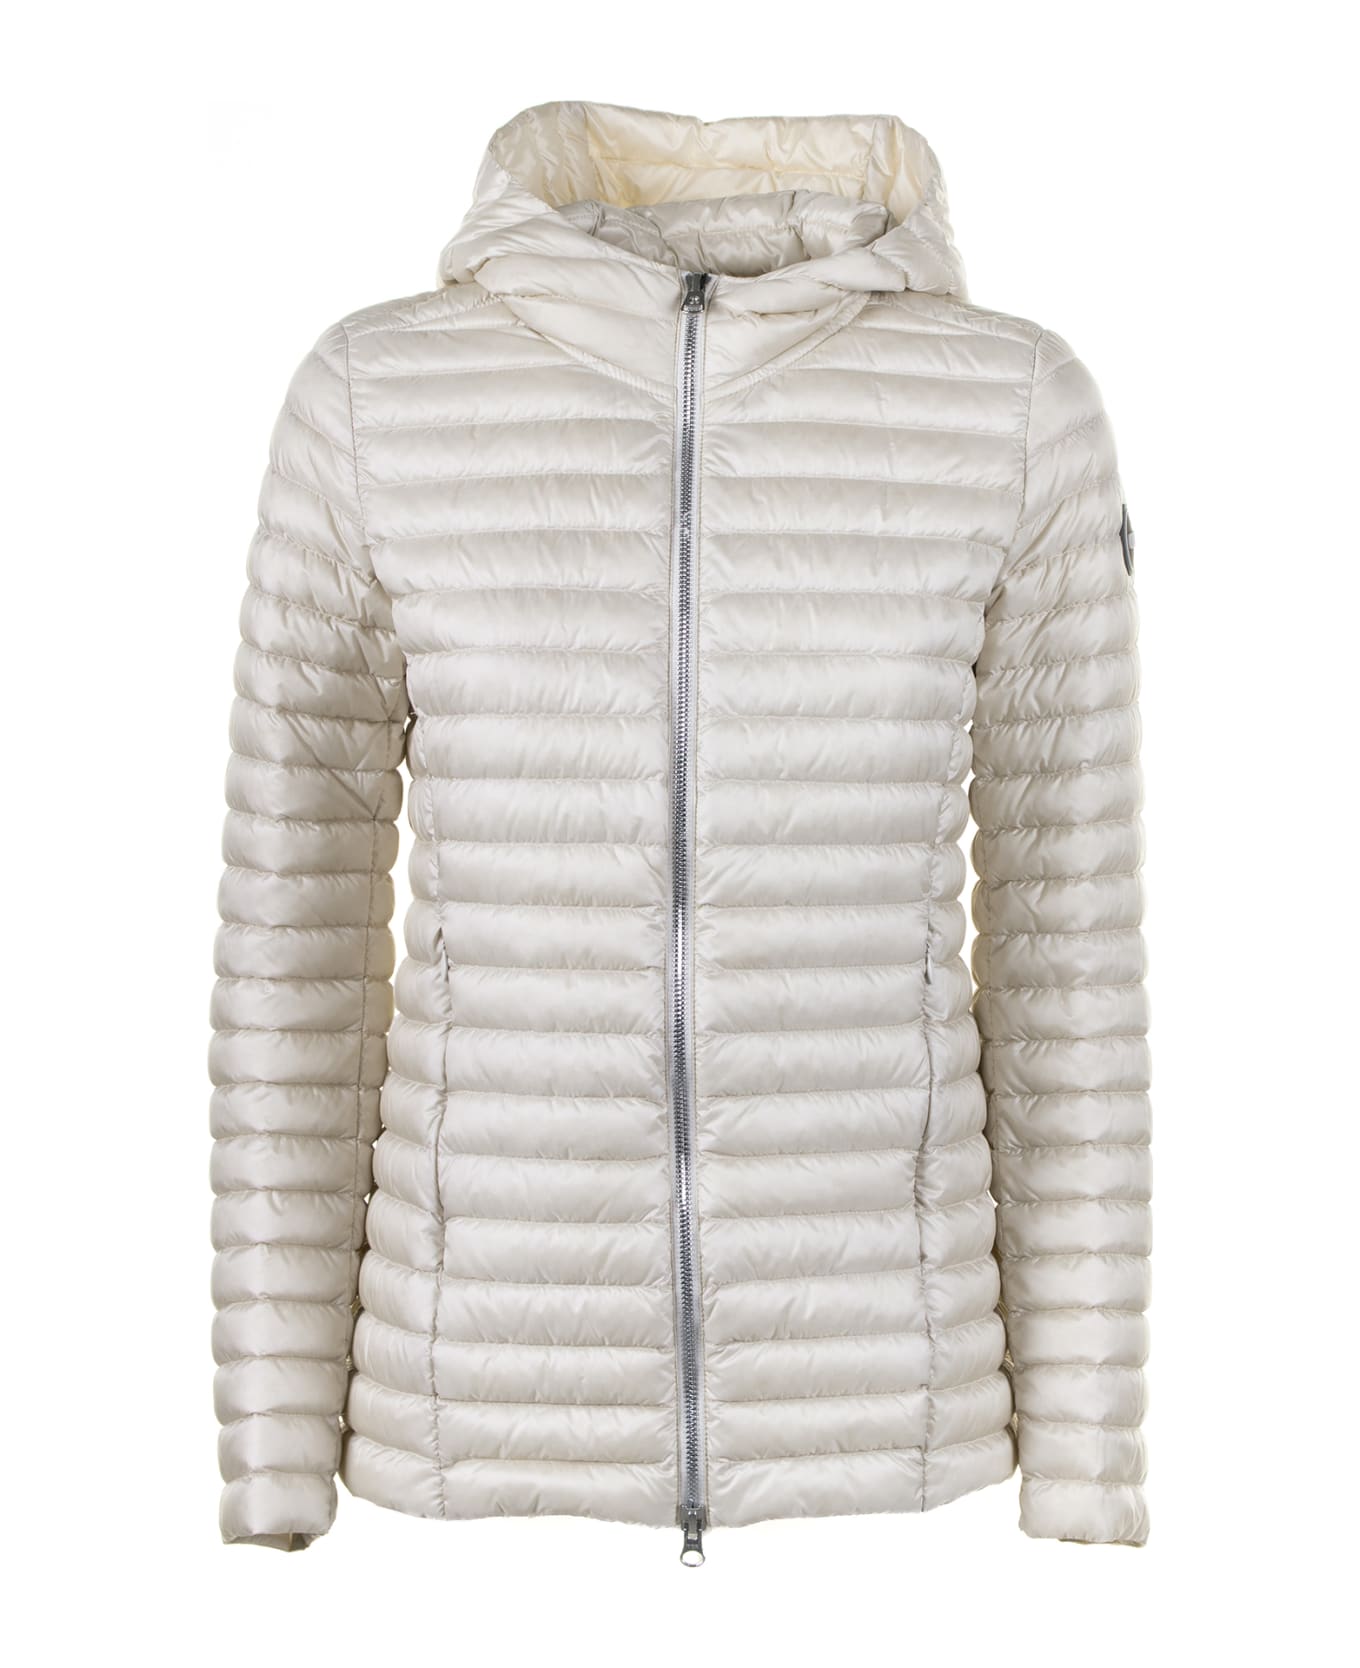 Colmar White Down Jacket With Hood - PORCELLANA